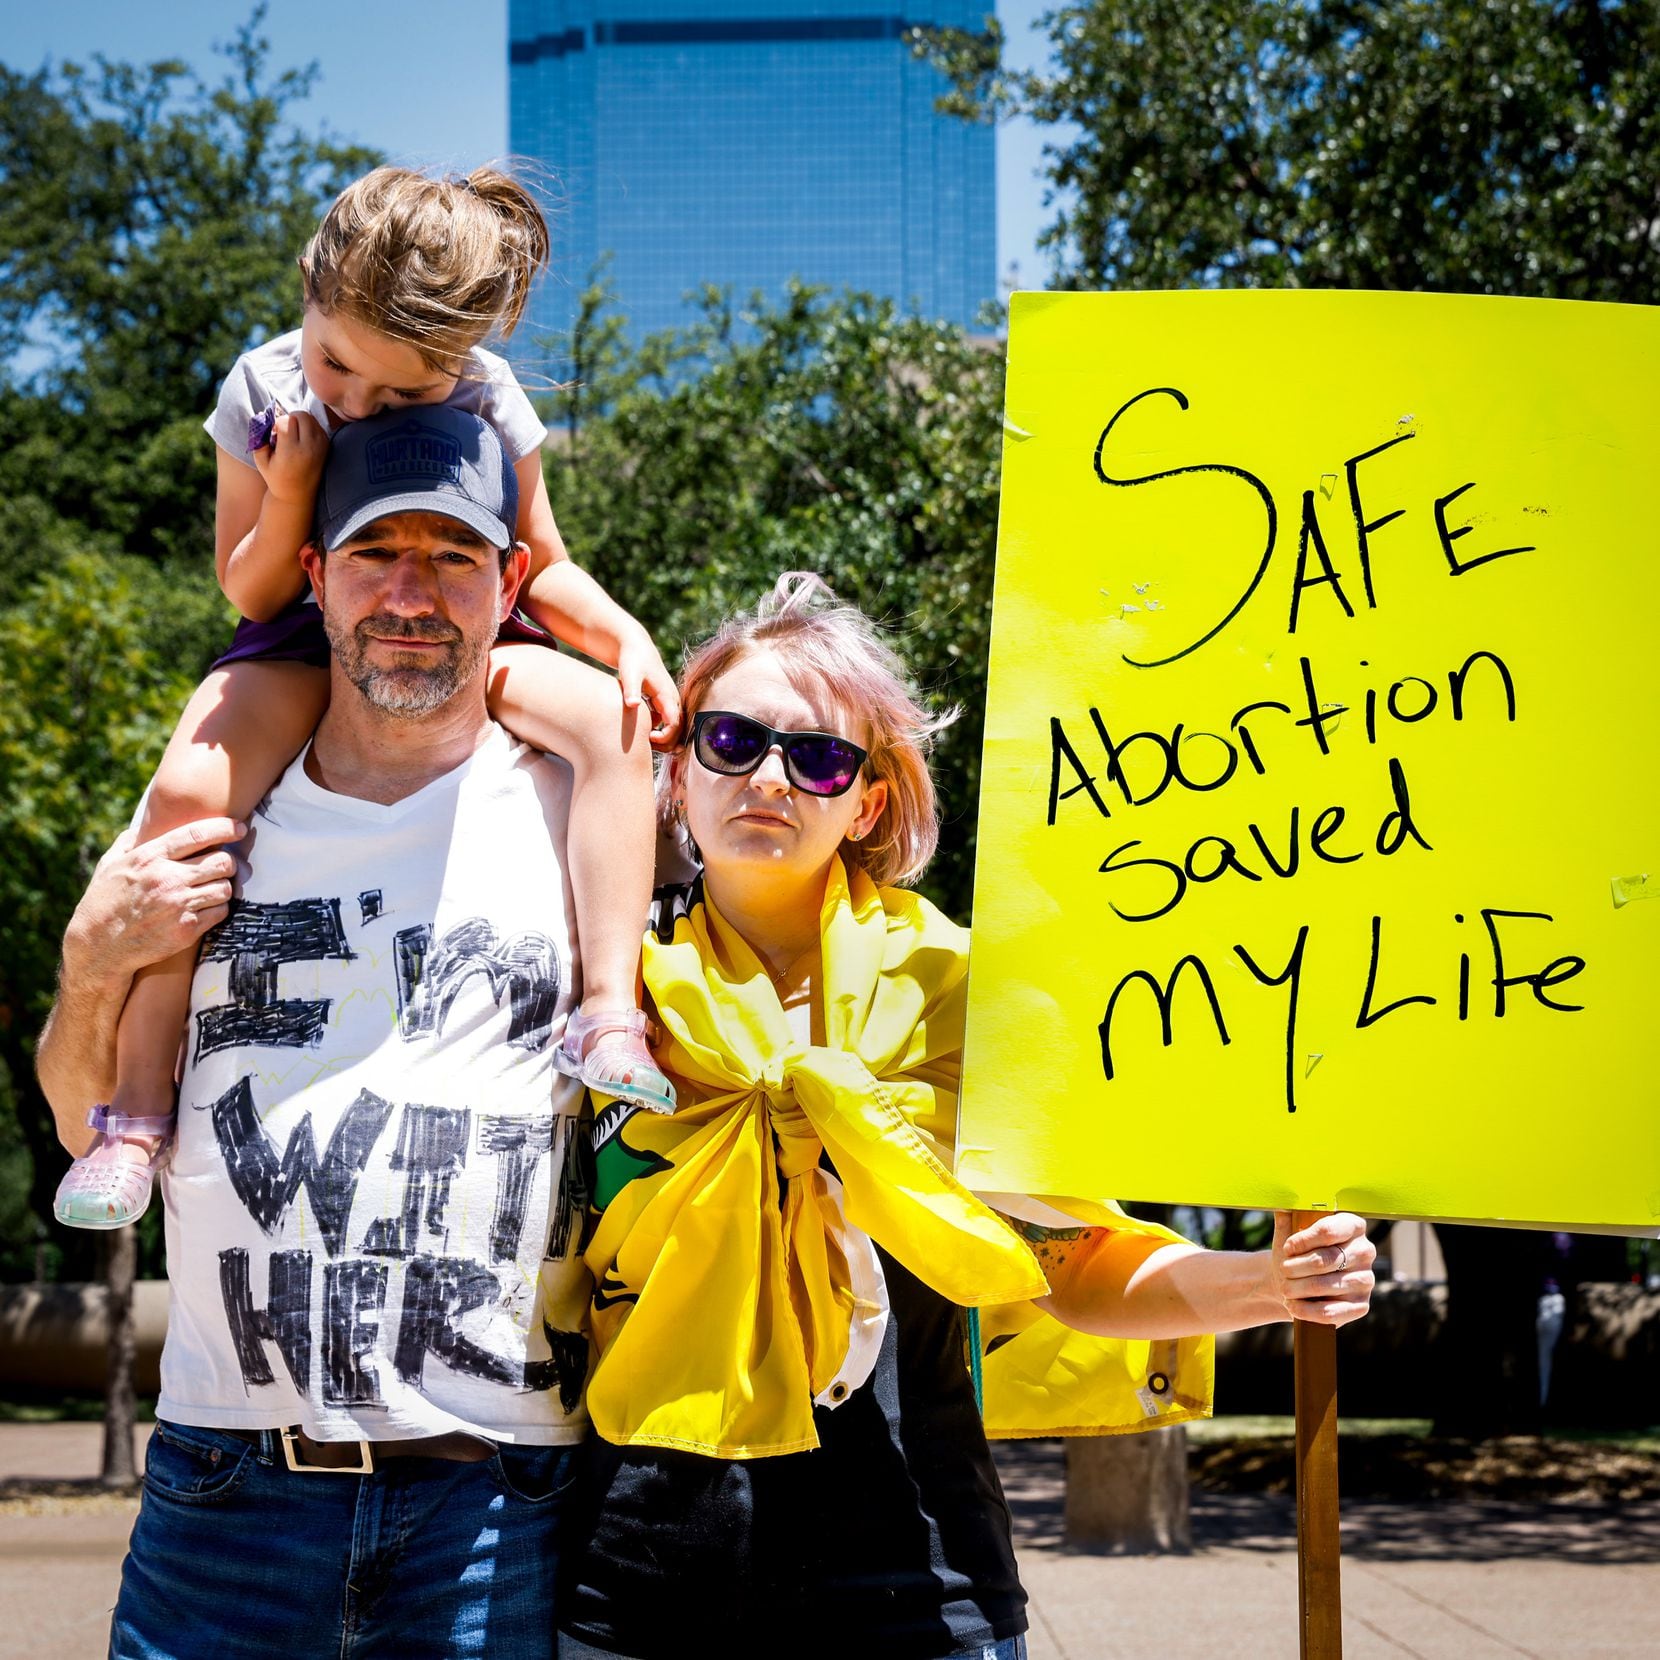 Andrea Huseman, 37, with her husband Andrew Ballenger, 46, and their daughter Emma...